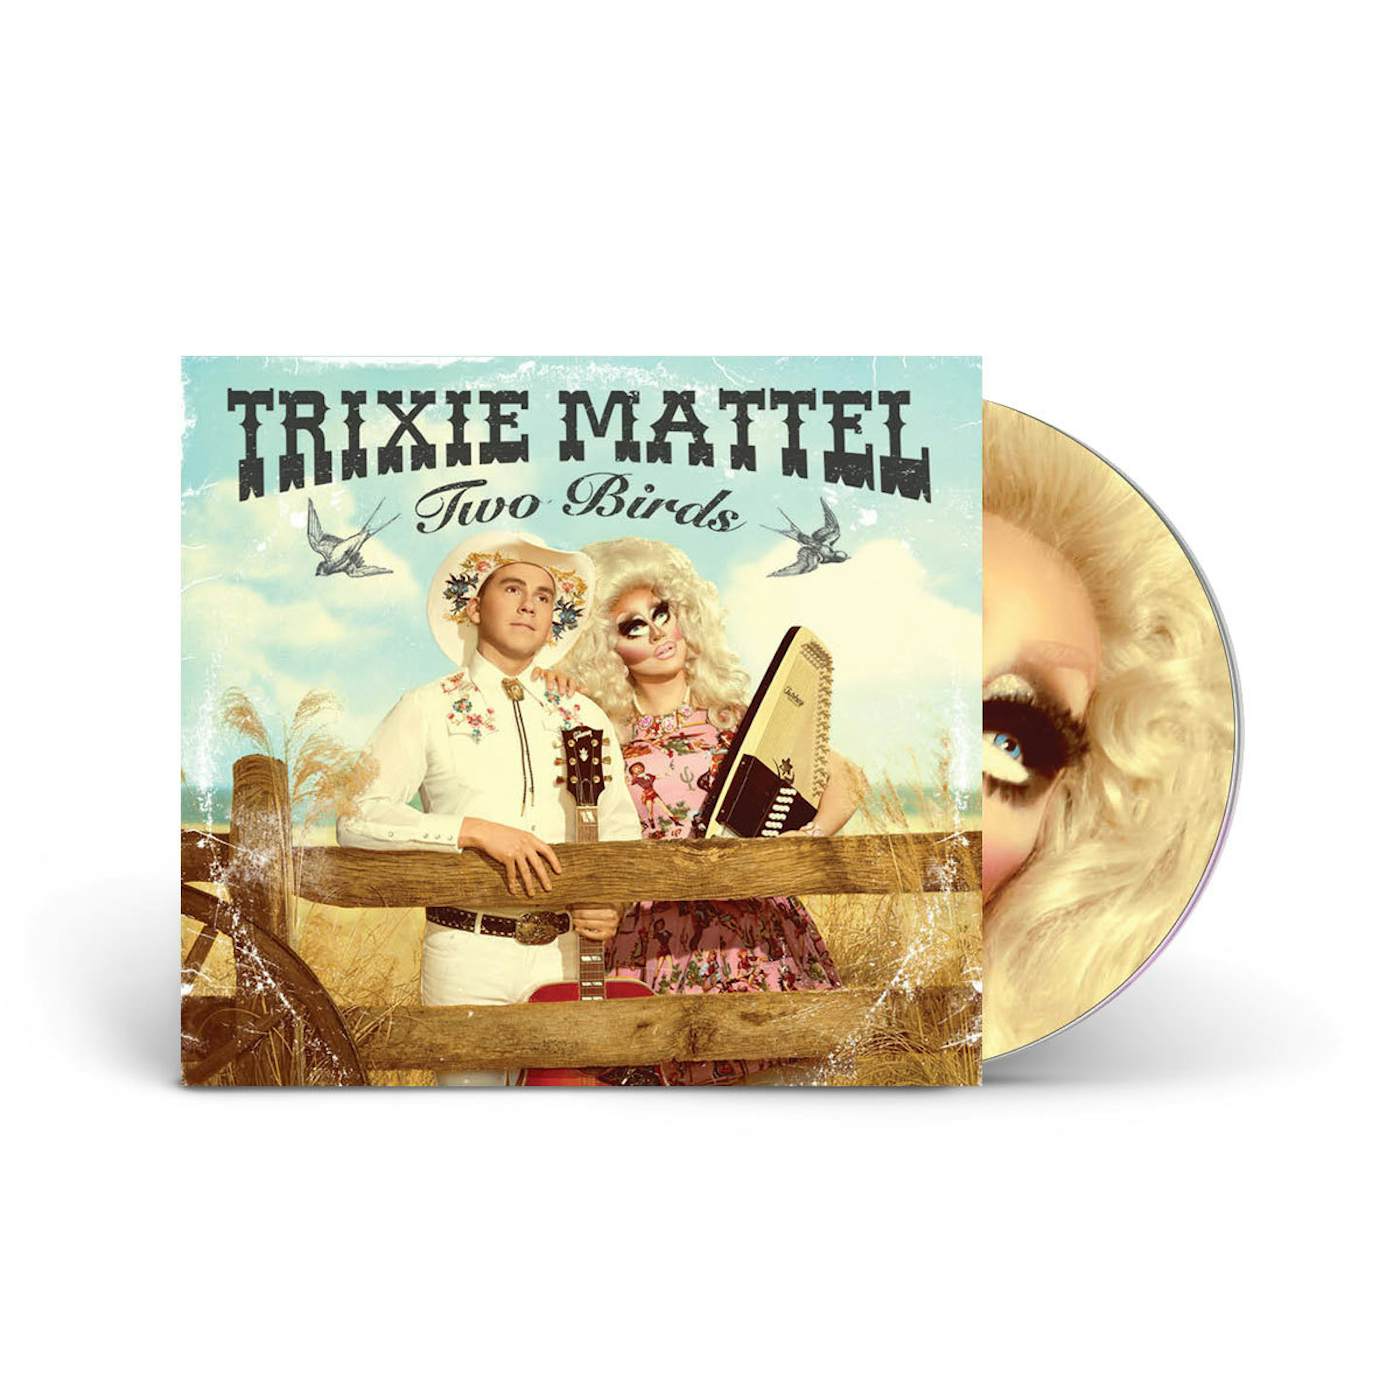 Trixie Mattel - “Two Birds, One Stone” Deluxe Edition CD